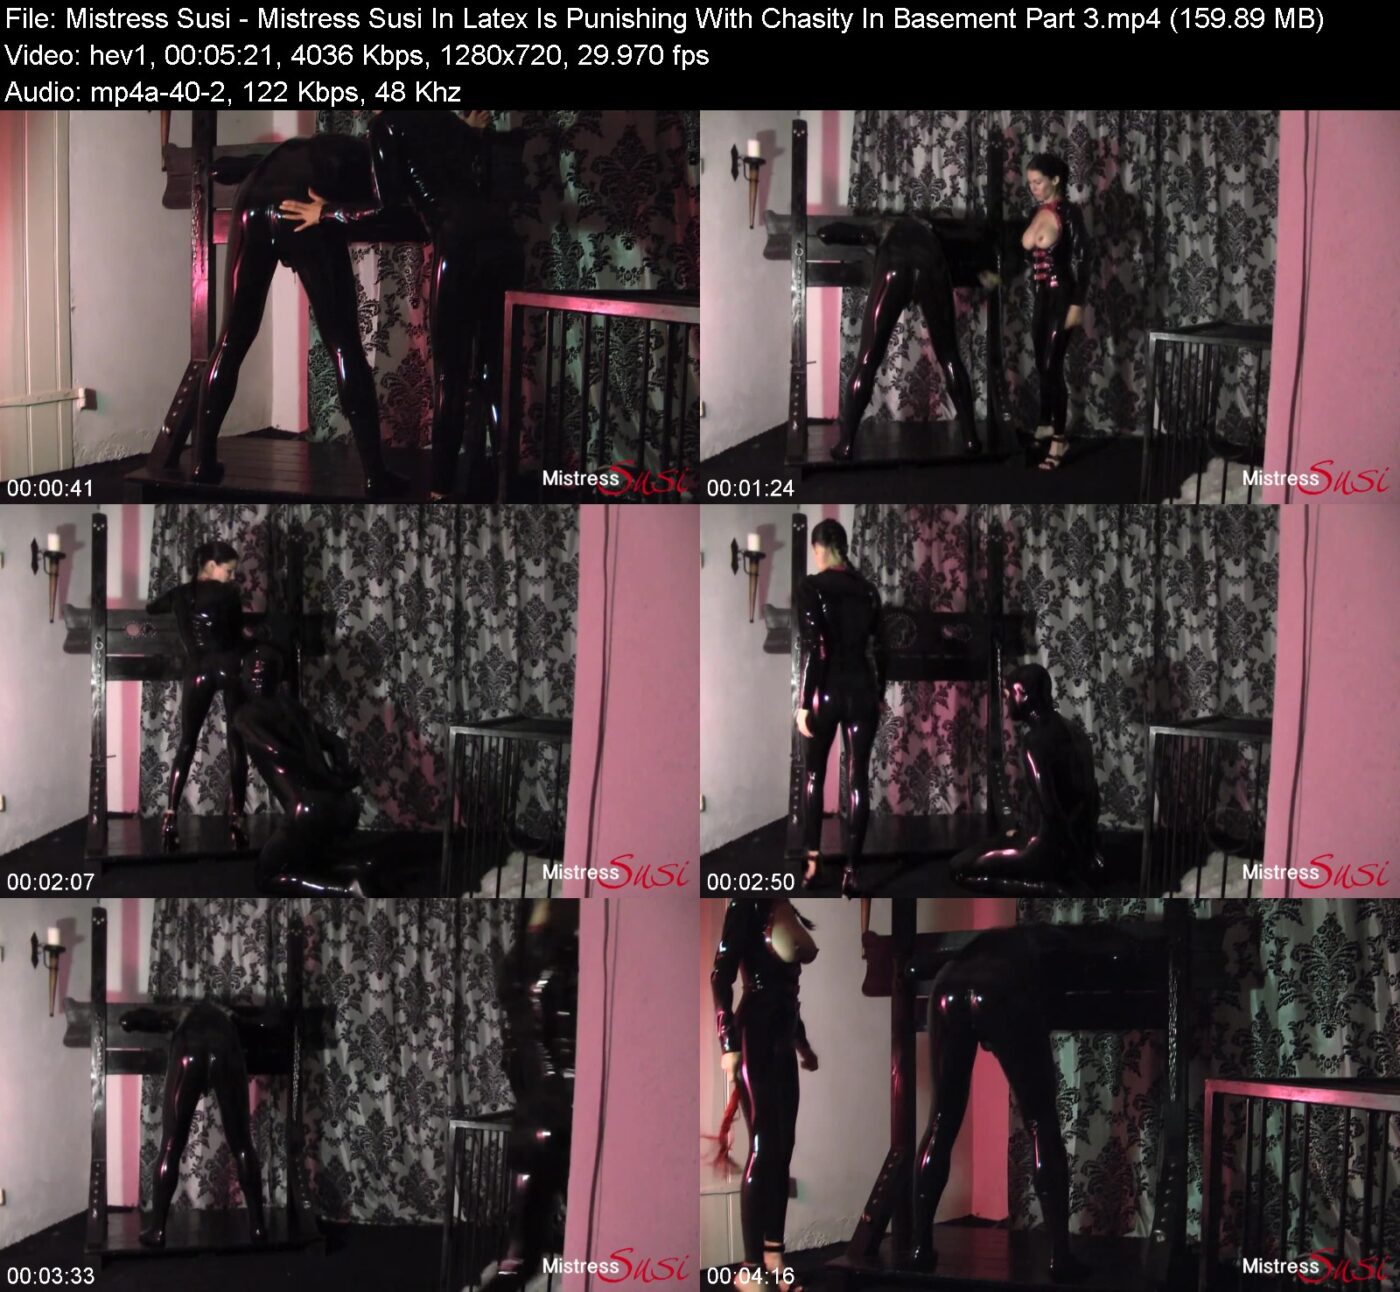 Mistress Susi - Mistress Susi In Latex Is Punishing With Chasity In Basement Part 3